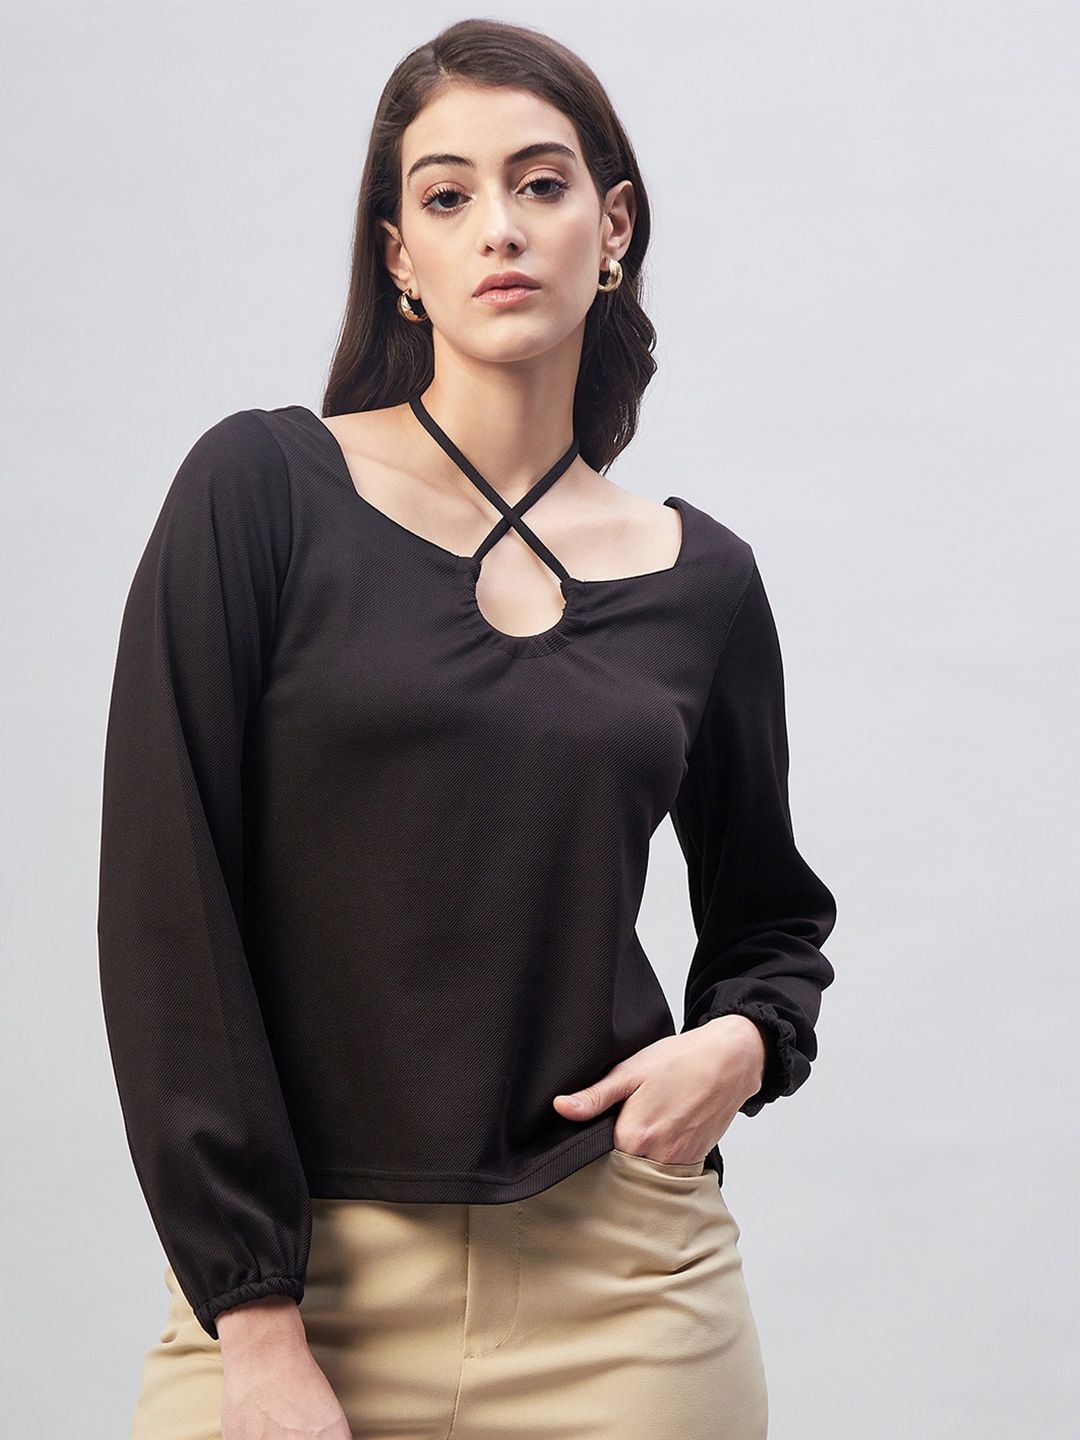 Marie Claire Tie-Up Neck Top Price in India